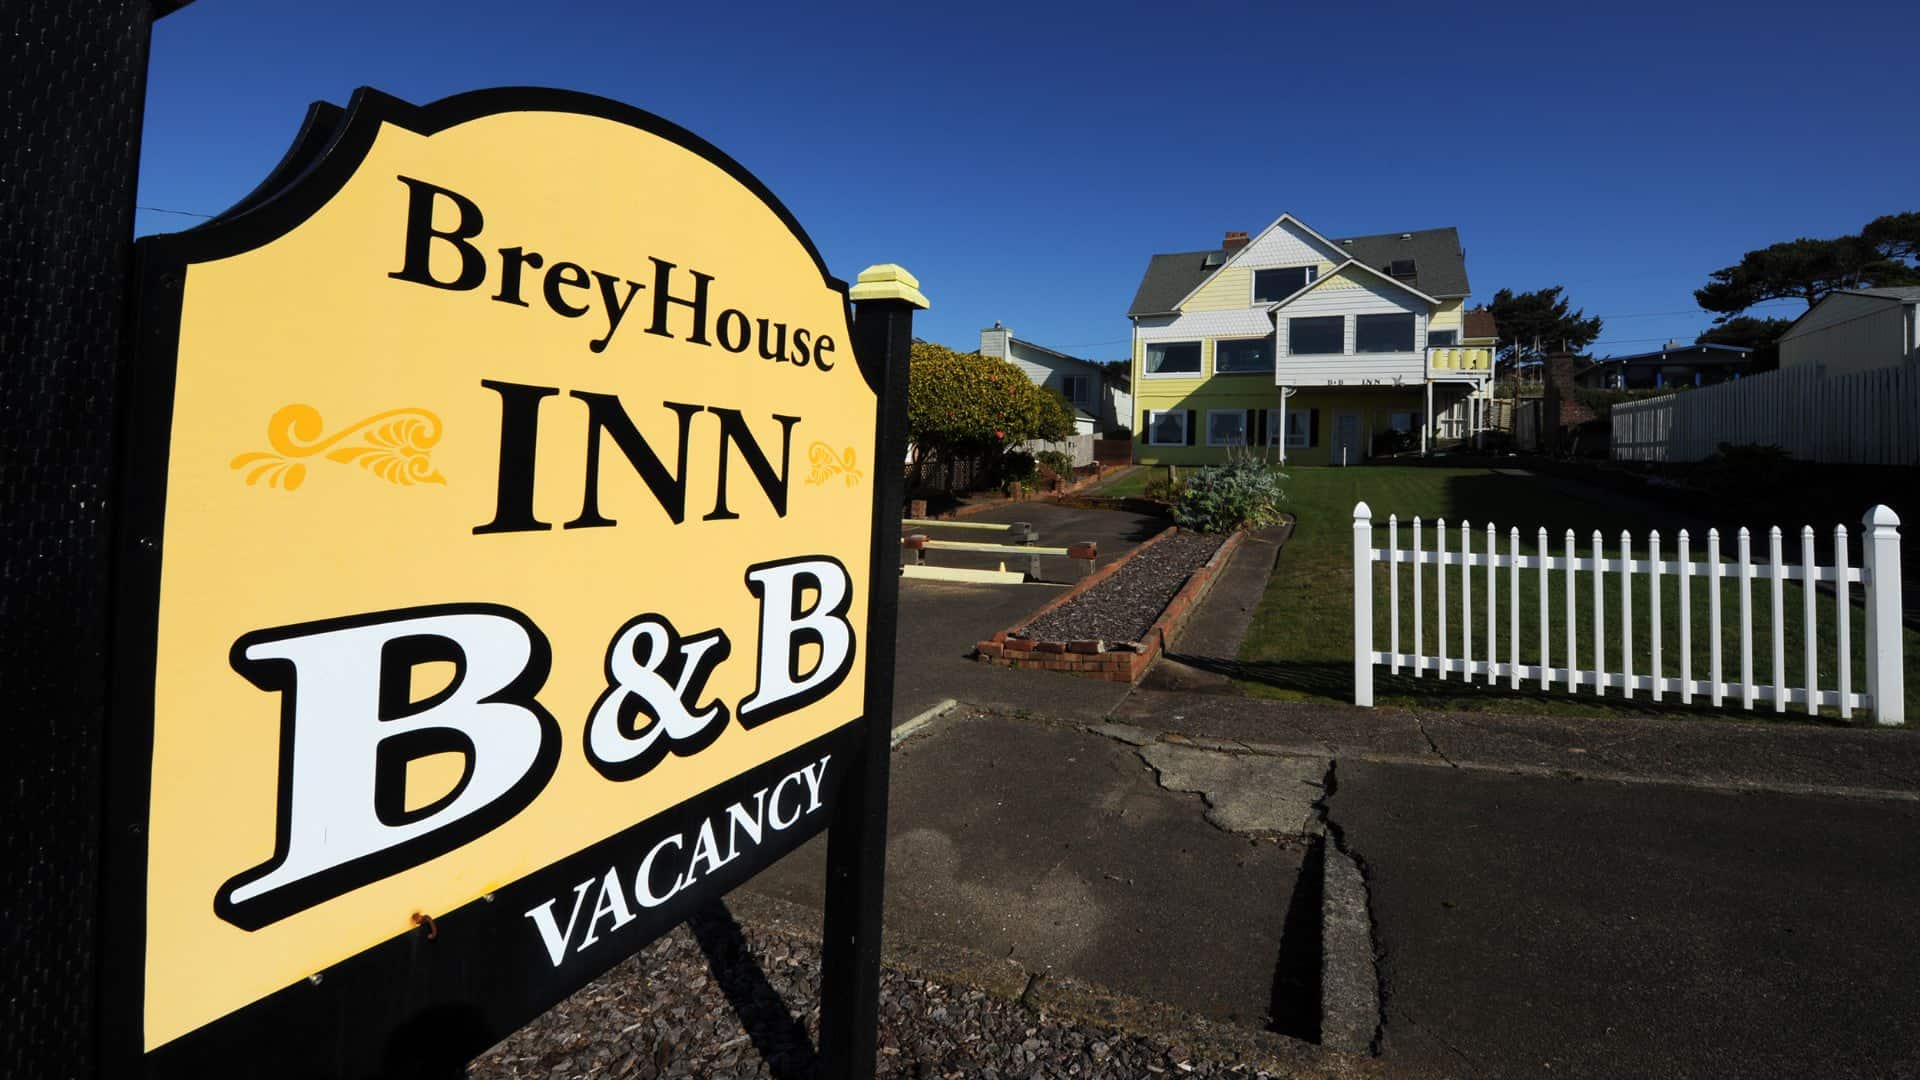 Exterior view of the property painted yellow with white trim, green lawn, white picket fence, and large BreyHouse Inn B&B sign